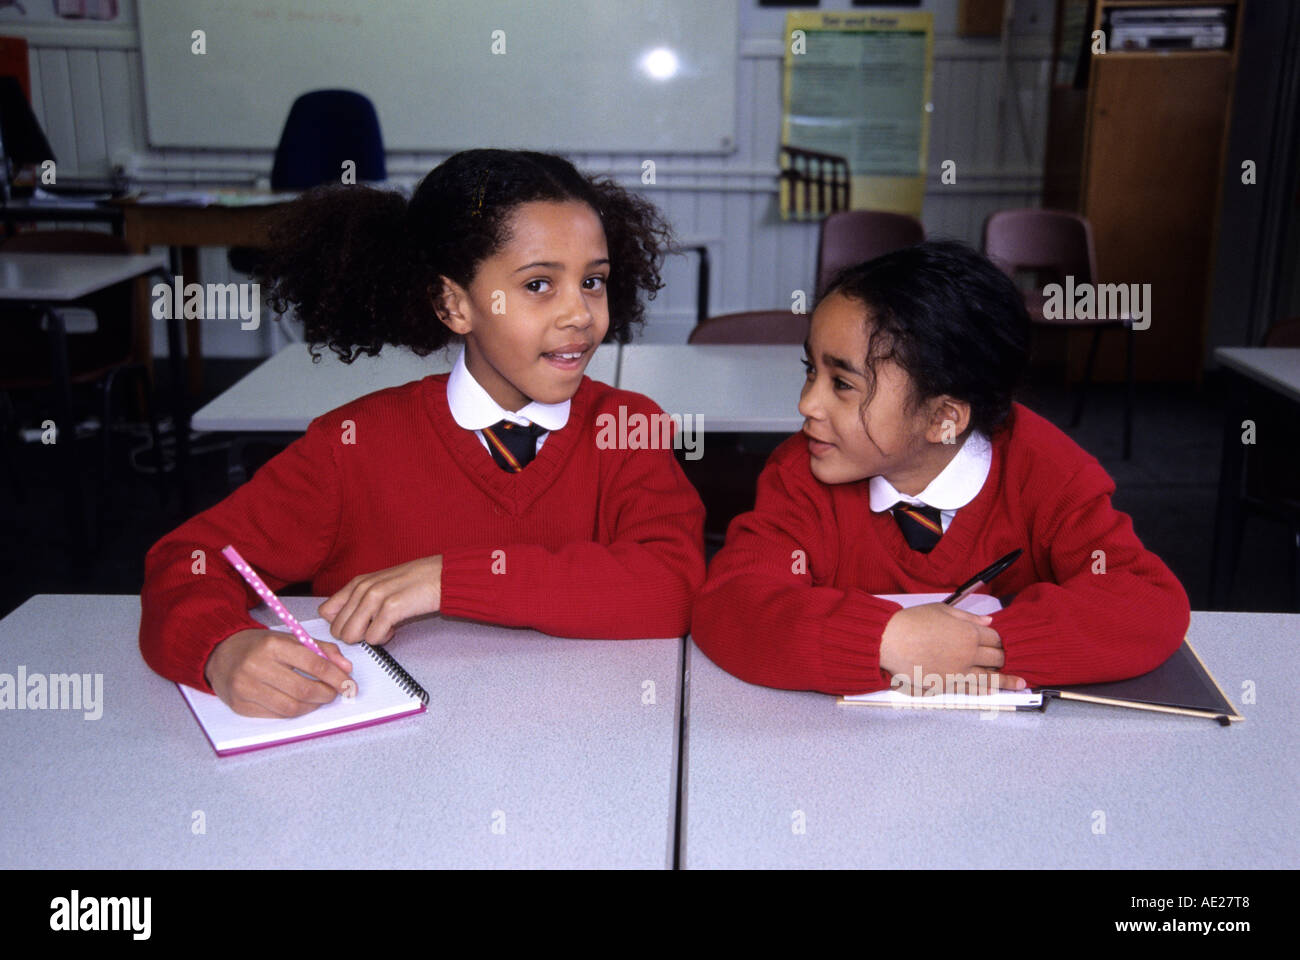 Chatting and cheating two black schoolgirls being disruptive in a classroom Stock Photo